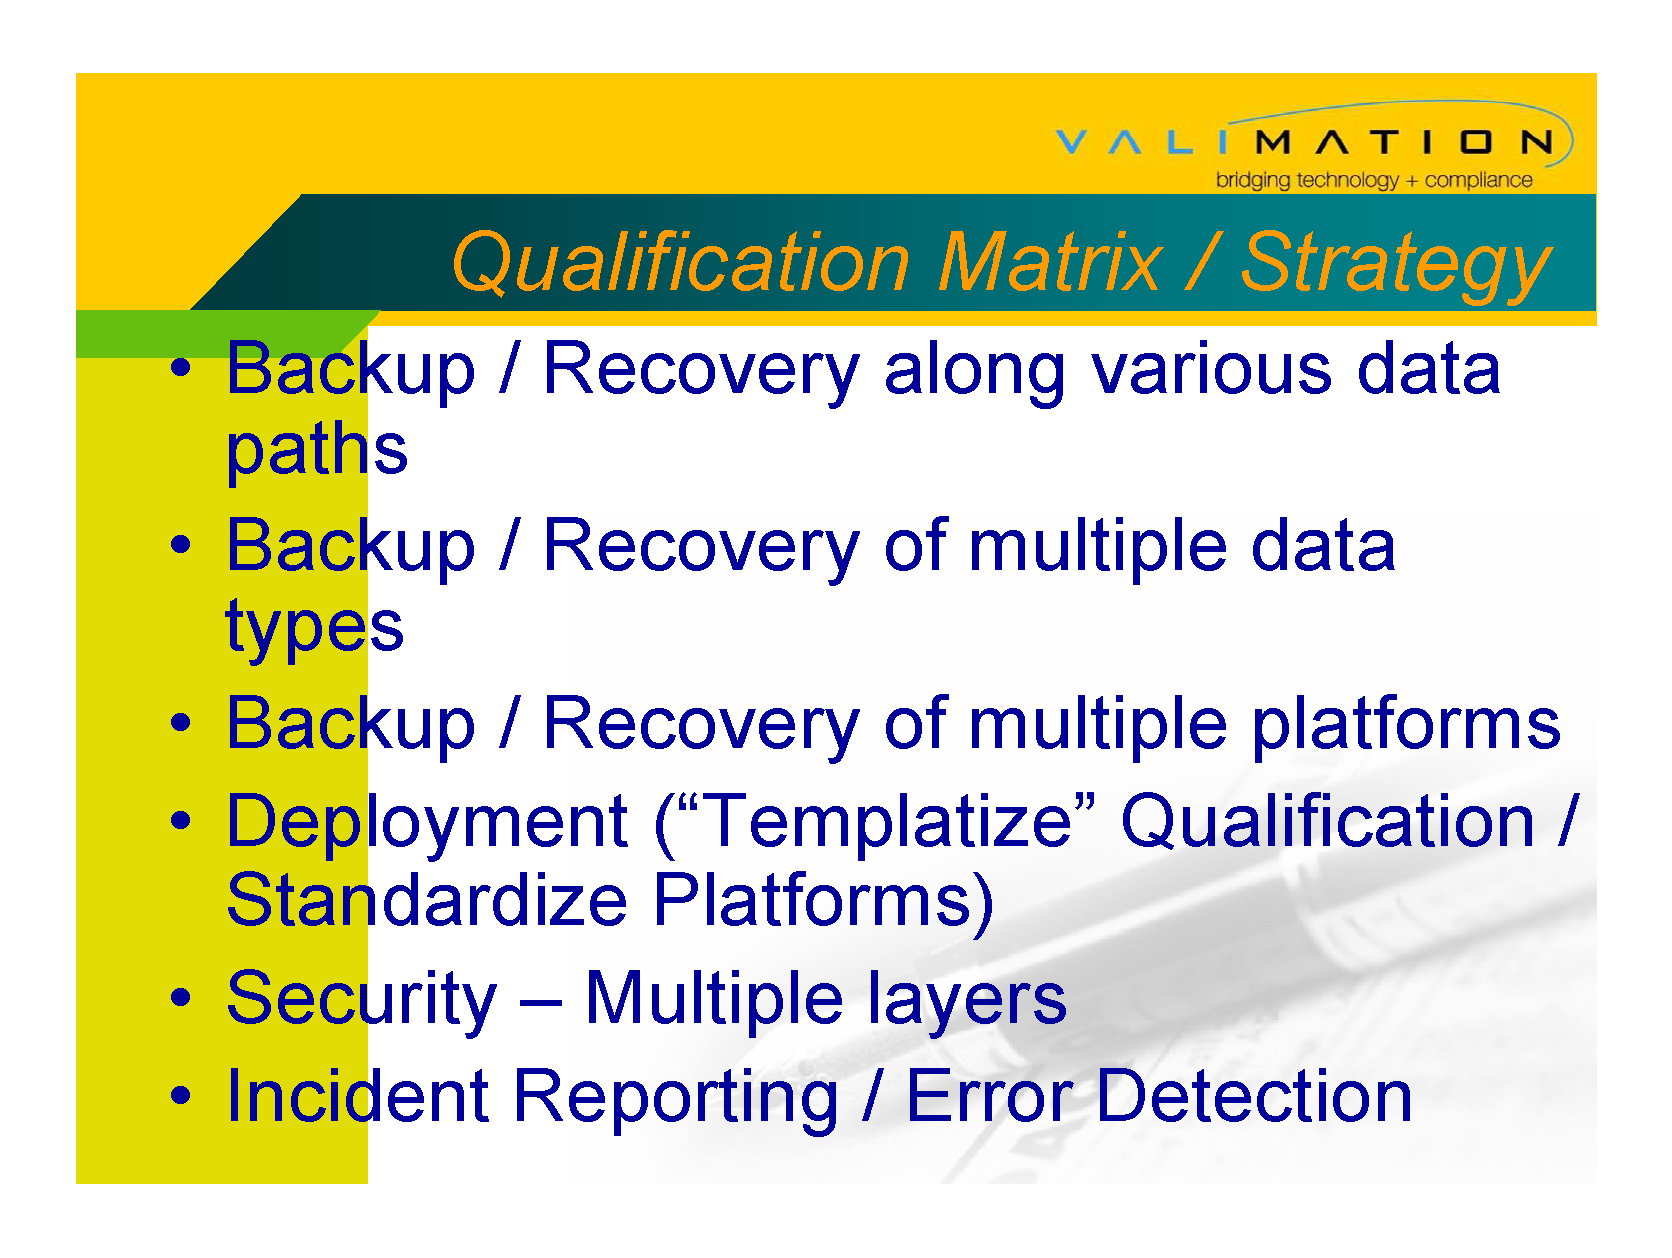 Network Qualification - Accretive Model By ValiMation_Page_38.png